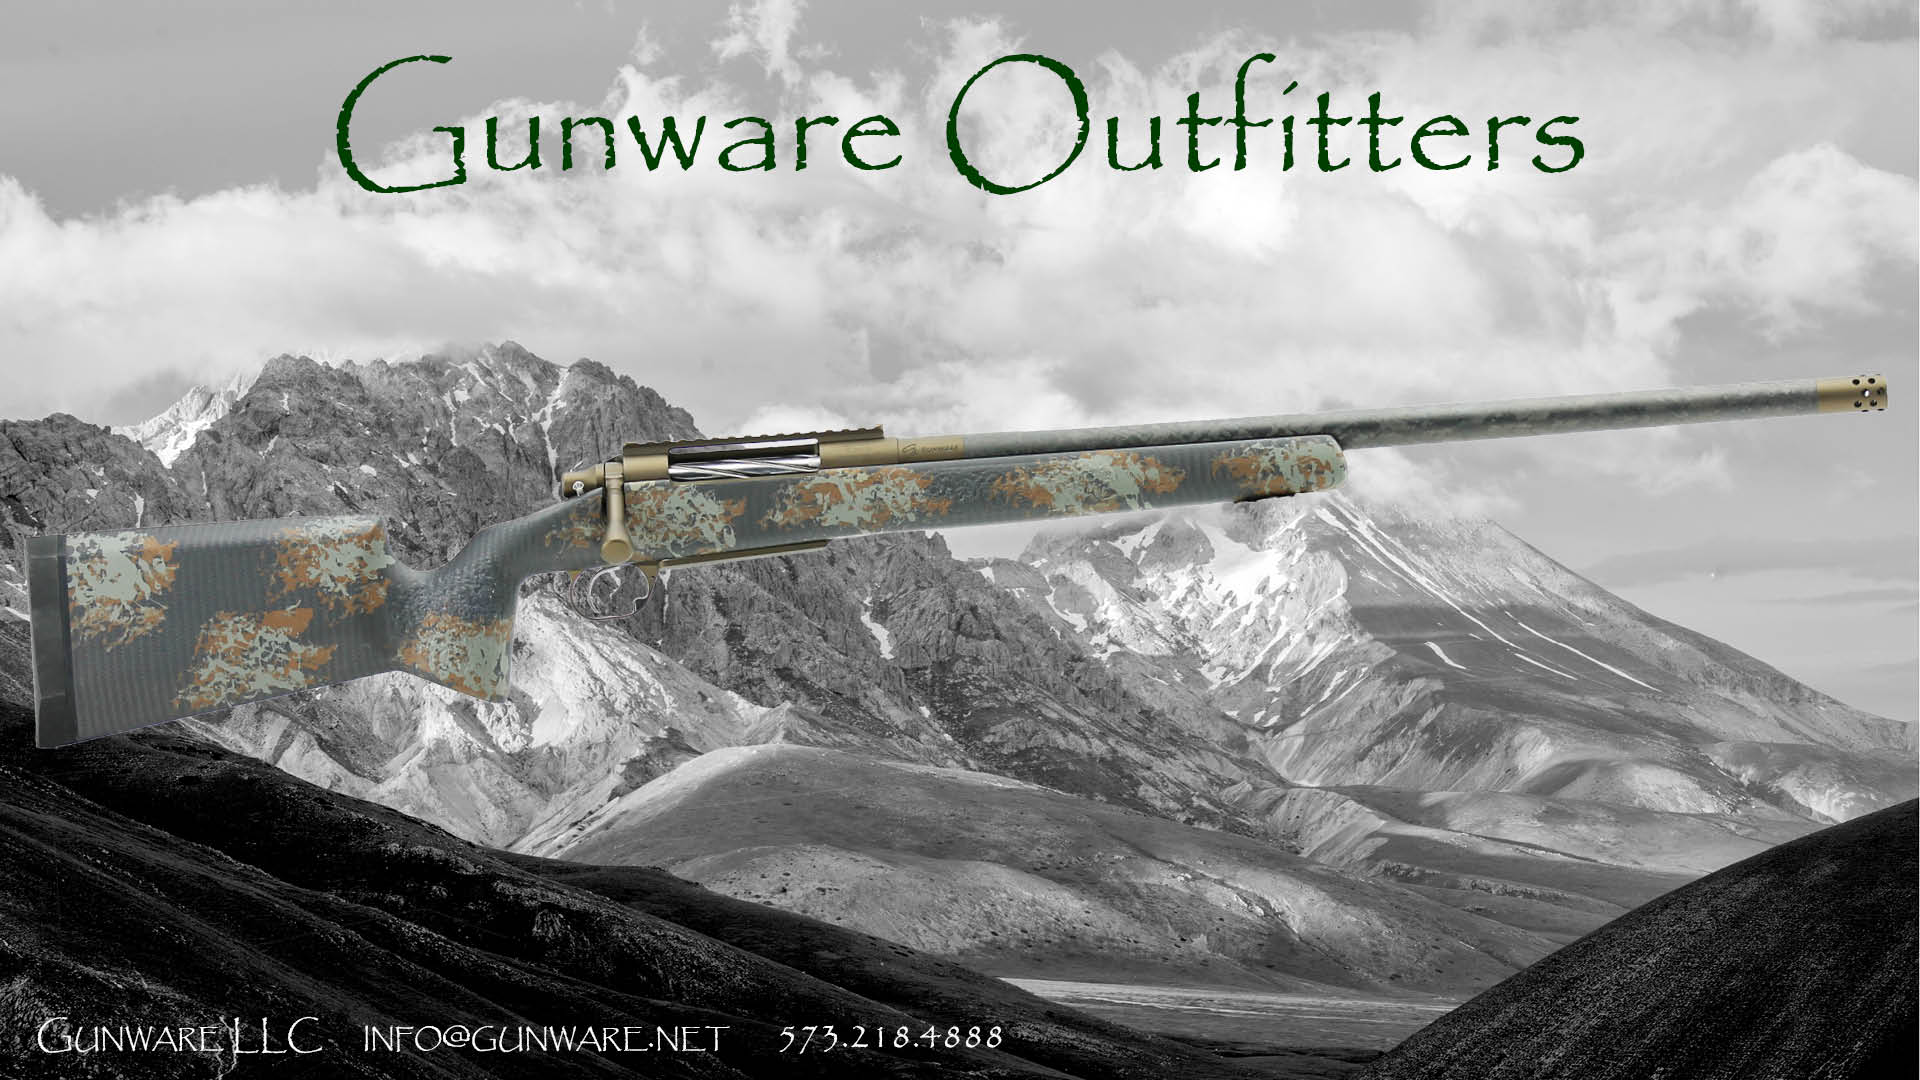 Outfitters Final pic.jpg